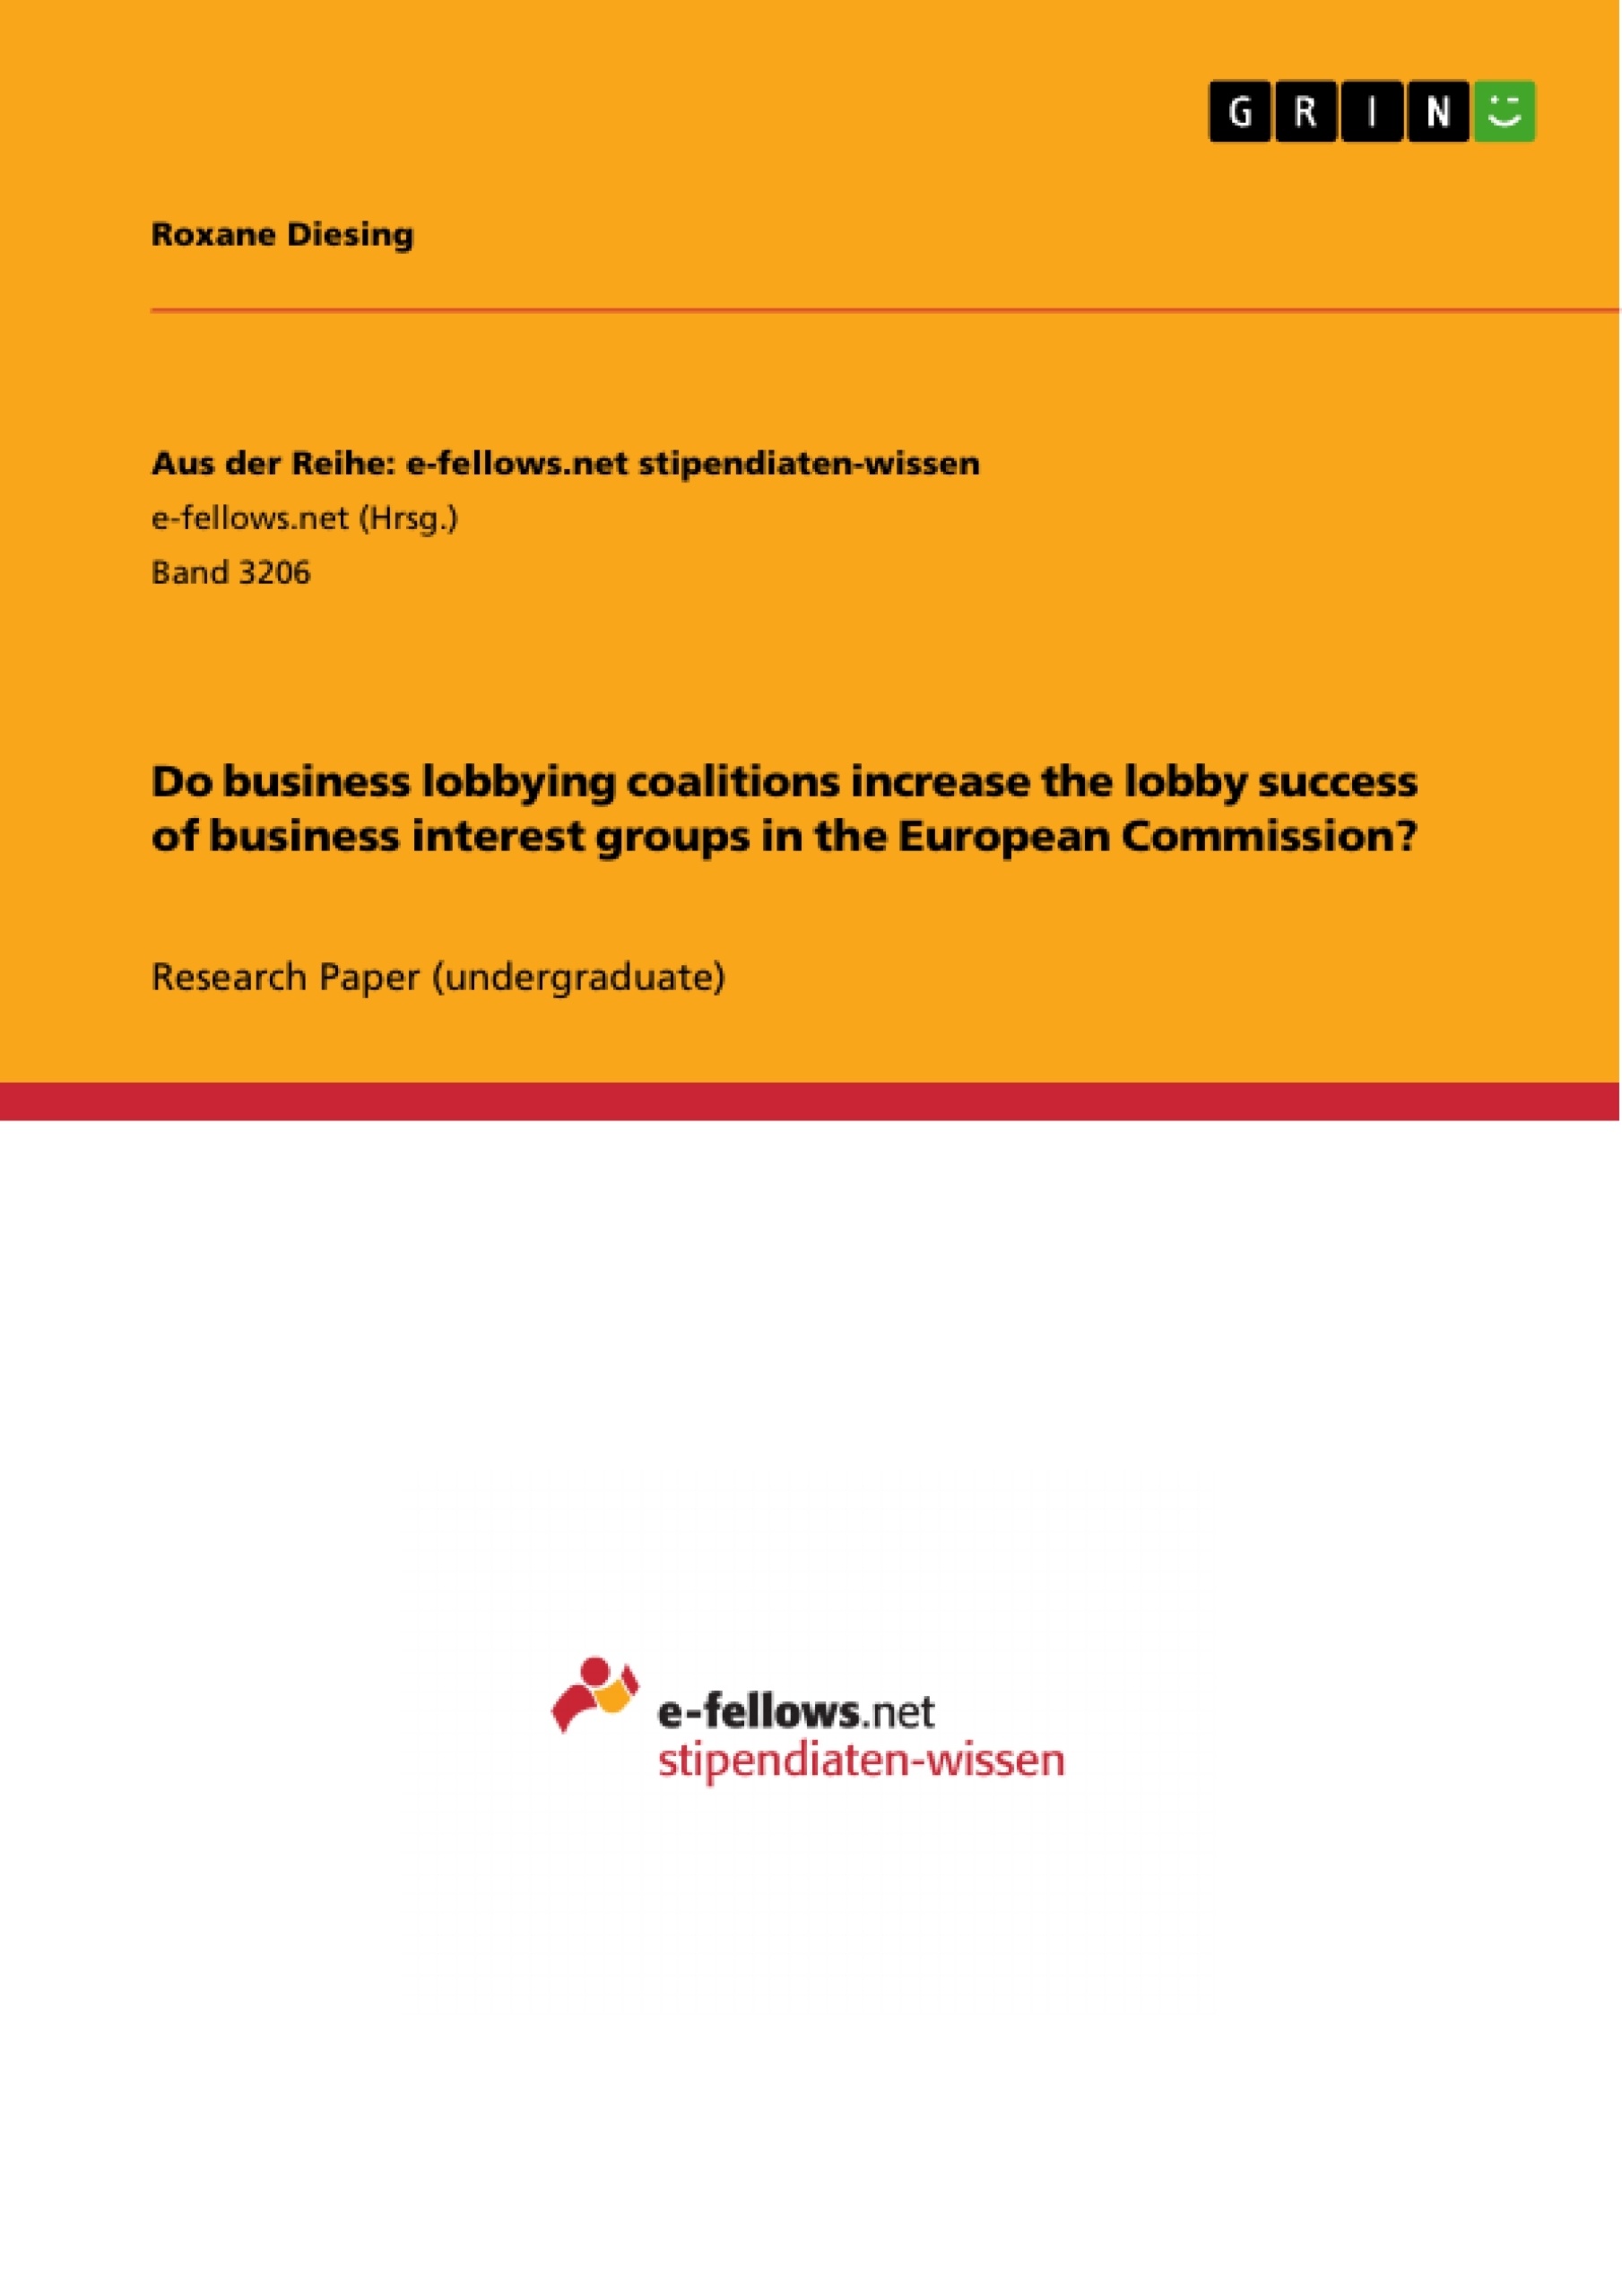 Title: Do business lobbying coalitions increase the lobby success of business interest groups in the European Commission?